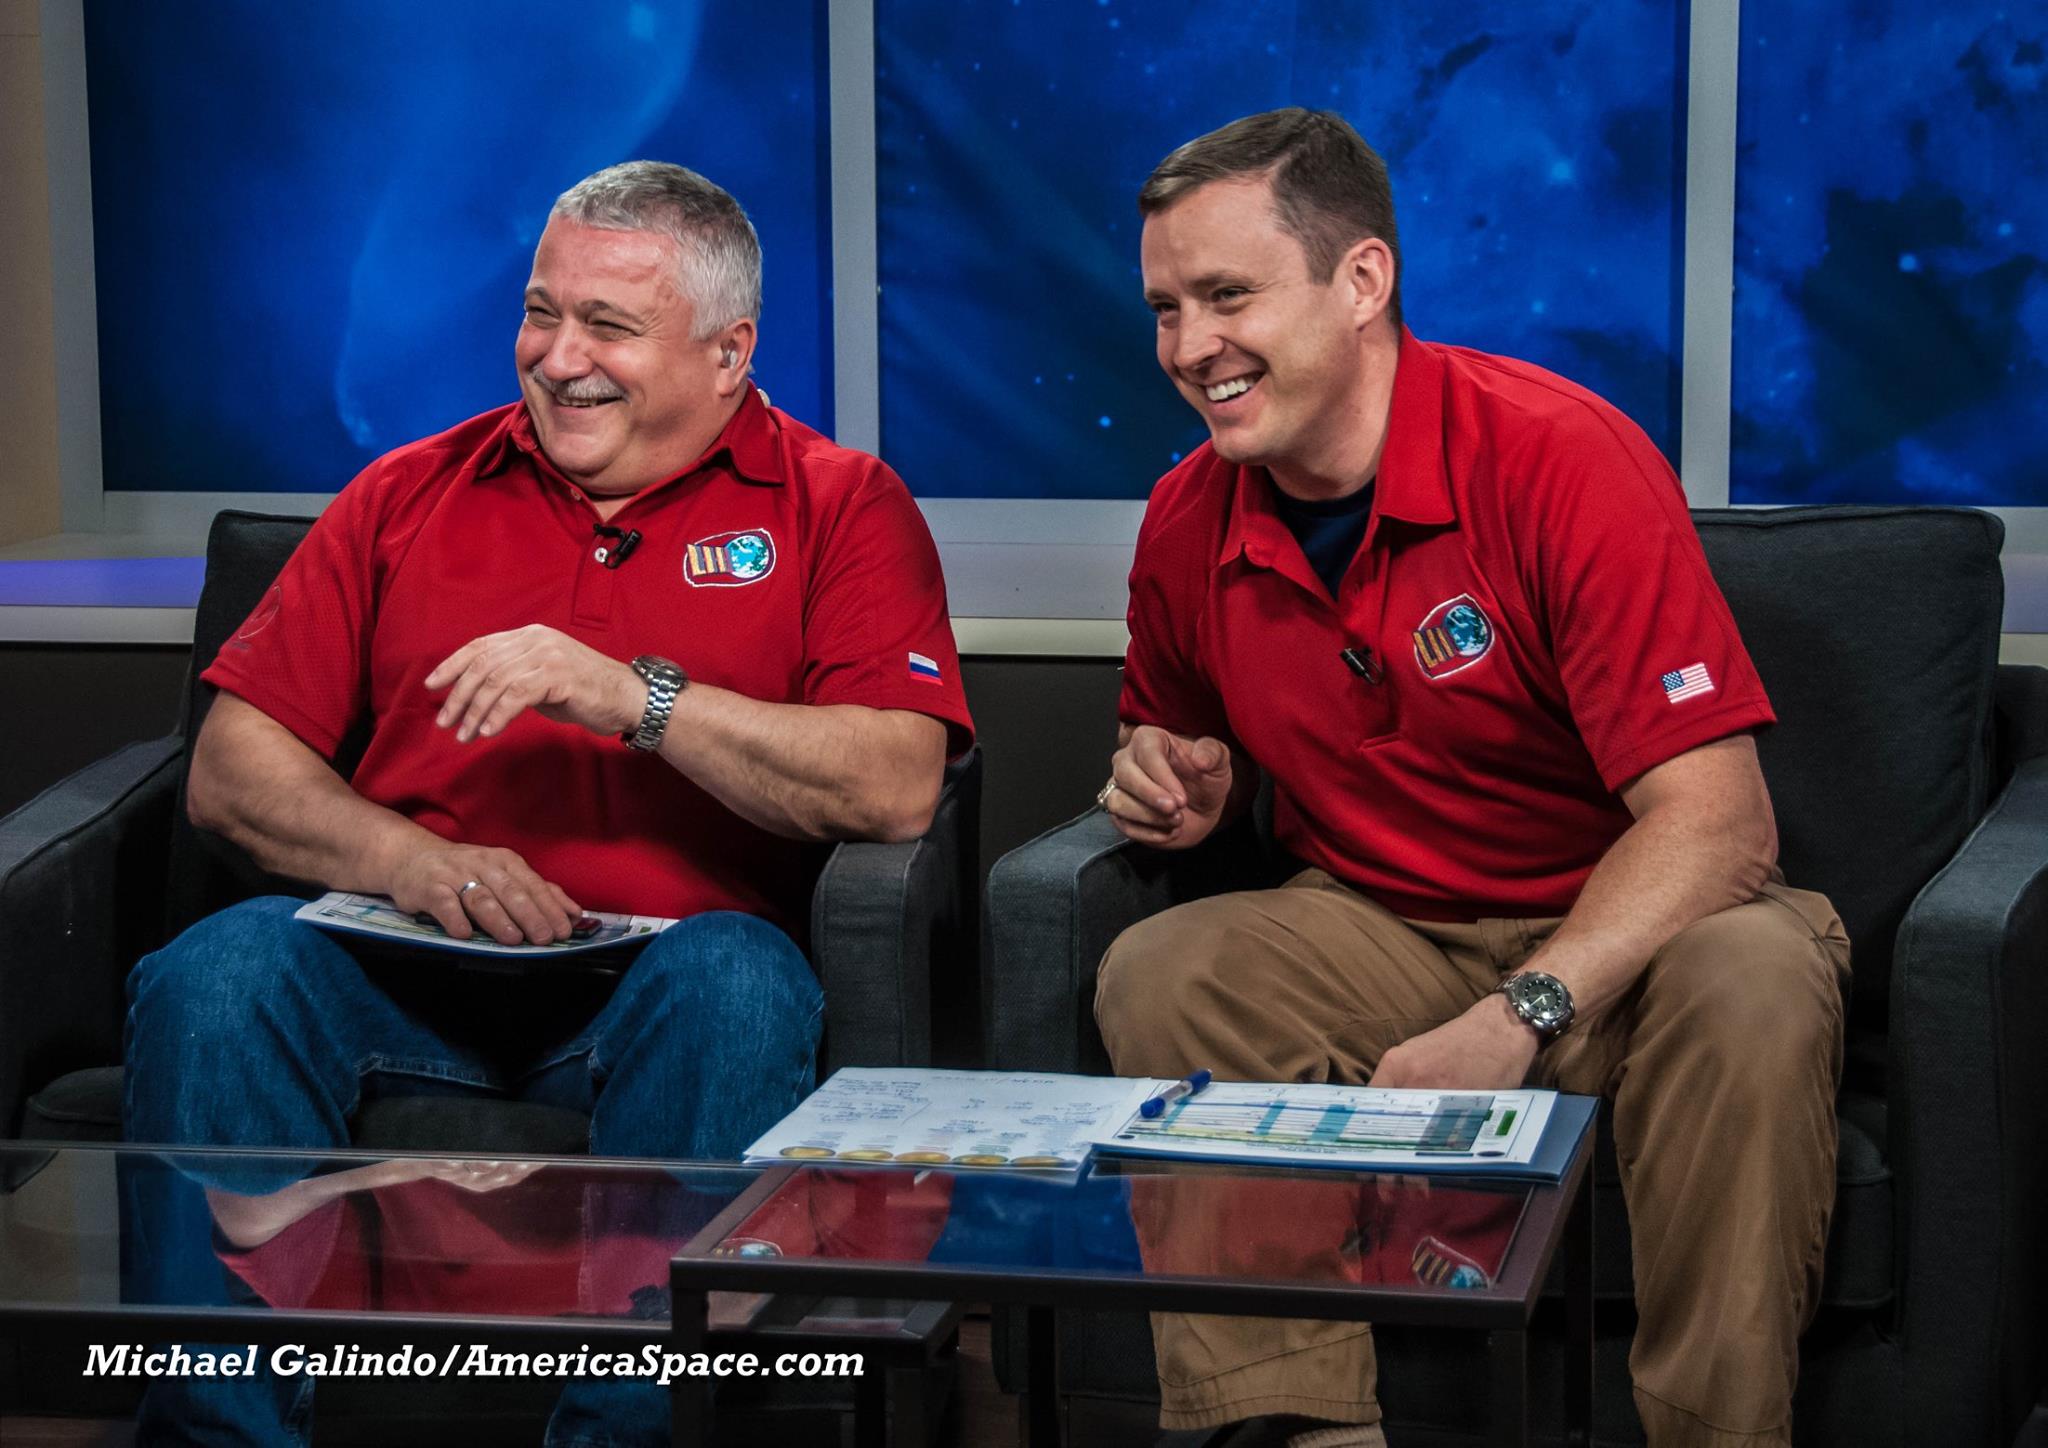 "Like an old married couple" was Jack Fischer's description of the camaraderie between himself and Fyodor Yurchikhin. The pair will launch in March 2017 for a six-month expedition to the International Space Station (ISS). Photo Credit: Michael Galindo/AmericaSpace